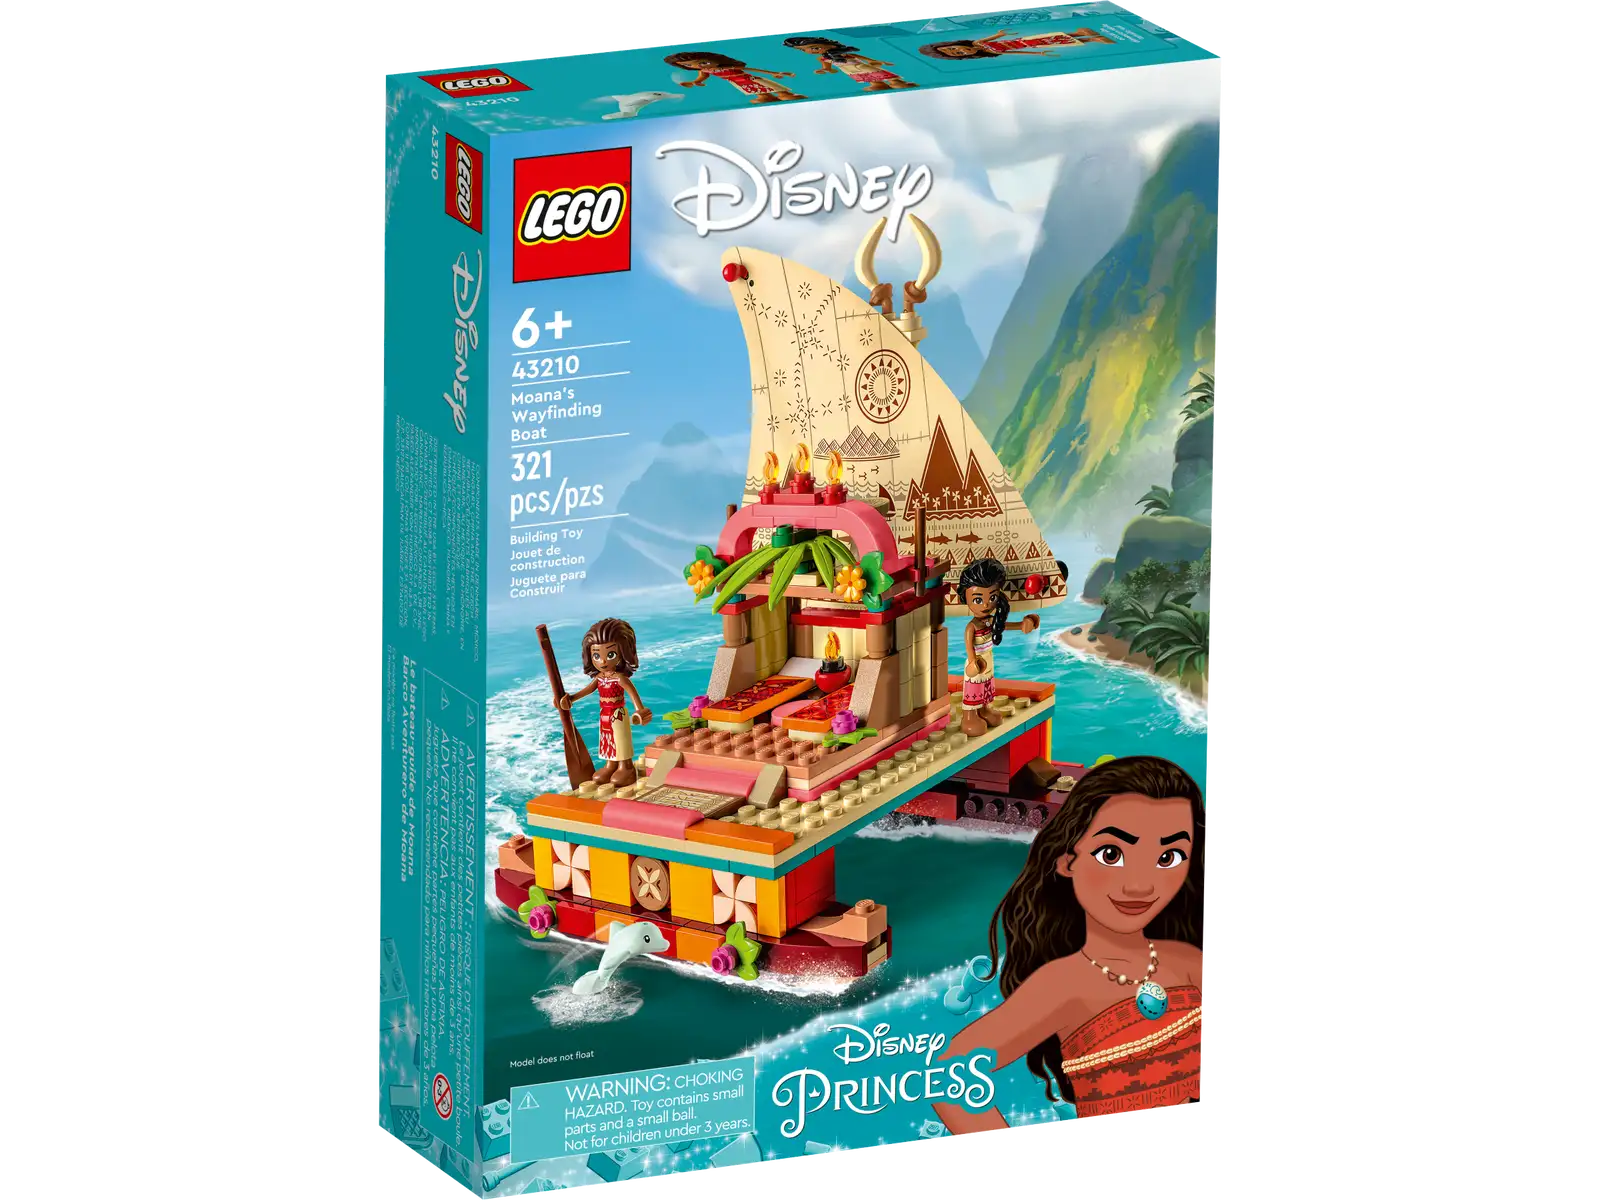 Adventure awaits any child aged 6+ or fan of Disney’s Moana with this imaginative LEGO® ǀ Disney Moana’s Wayfinding Boat (43210) set. The kit features a double-hulled boat with a removable shelter and printed sail, storage space, 2 LEGO mini-doll figures, a LEGO dolphin figure and decorative elements. Let the LEGO Builder app guide kids on an intuitive building adventure, allowing them to zoom in and rotate models in 3D, save sets and track their progress. Hands-on play This detailed set ispacked with features and accessories to boost the fun as kids role-play and relive movie scenes or create their own. The boat incorporates action and house play, while helping to inspire children’s creativity skills. It can be played with independently or added to other LEGO ǀ Disney sets (sold separately). Fun characters This set gets kids playing fast with Moana and Sina LEGO mini-doll figures, plus a LEGO dolphin figure, and makes a fun and inspiring gift for any Disney fan. Open-ended play – Give a boat-loving Disney’s Moana fan aged 6+ a gift full of details to inspire their imagination with this LEGO® ǀ Disney Moana’s Wayfinding Boat (43210) set Creative fun – This set includes a double-hulled boat with a sail, a large deck with a shelter and 2 cots, 2 mini-doll figures, a LEGO® animal figure and lots of decorative, play-inspiring accessories Beloved characters – Featuring Disney’s Moana and Sina LEGO® mini-doll figures, the set is designed to inspire unlimited adventures and exploration with family or friends Birthday gift for ages 6+ – Disney fans will enjoy this set full of possibilities, with an iconic boat from a Disney Animation Studio Film. It’s a treat for any child with a passion for adventure Creative play – With the boat measuring over 6 in. (17 cm) high, 7 in (19 cm) long and 5 in. (14 cm) wide, this set lets kids use their creativity and imaginations to enjoy endless play A helping hand – Discover intuitive instructions inthe LEGO® Builder app where builders can zoom in and rotate models in 3D, track their progress and save sets as they develop new skills Important life skills – With detailed LEGO® mini-doll figures and a recognizable build, this Disney construction set encourages open creative play that helps build life skills through fun Uncompromising quality – Ever since 1958, LEGO® components have met stringent industry standards to ensure they connect consistently Safety first – LEGO® components are dropped, heated, crushed, twisted and analyzed to make sure they meet rigorous global safety standards